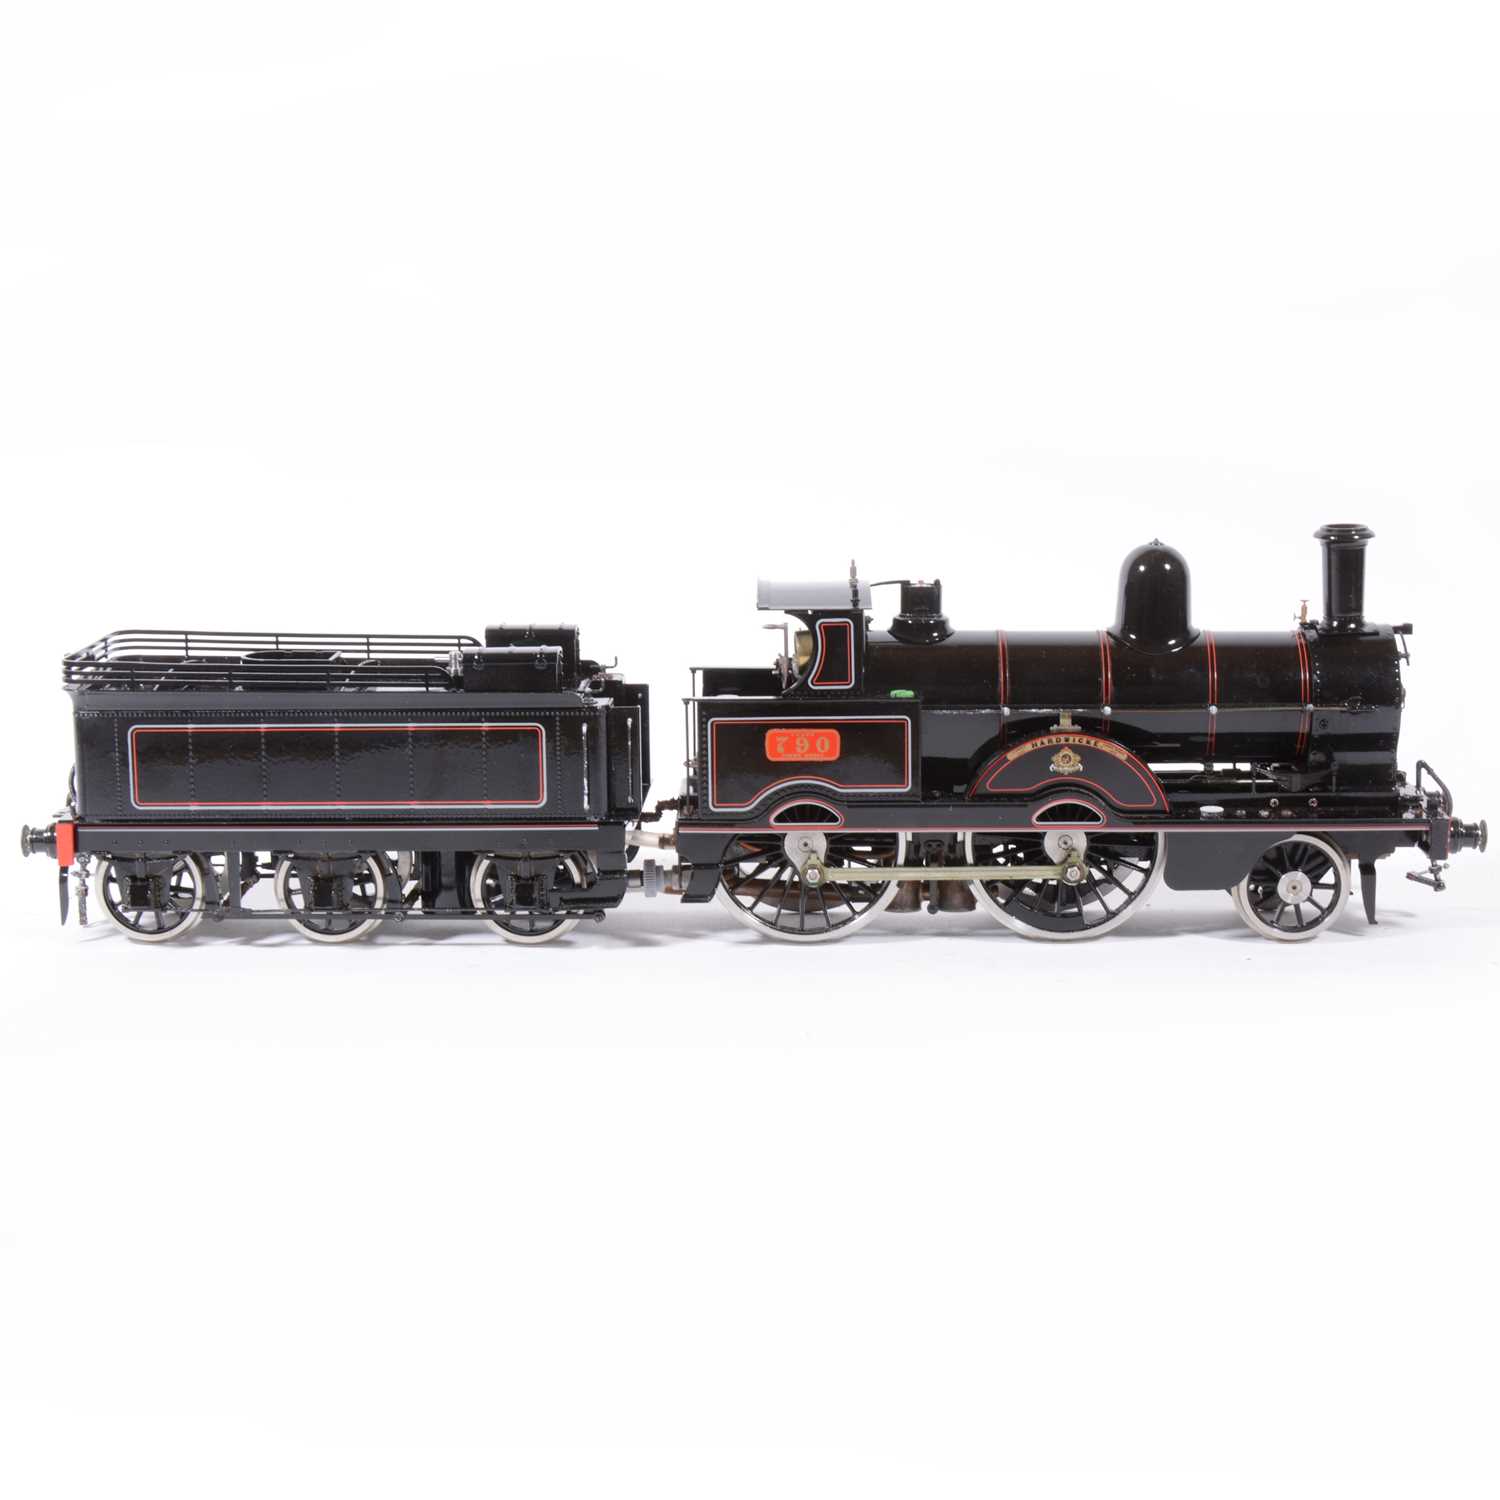 Lot 53 - Aster Hobby live steam, gauge 1 / G scale, 45mm locomotive and tender, 'Jumbo' Hardwicke, LNWR no.790, with wooden case.